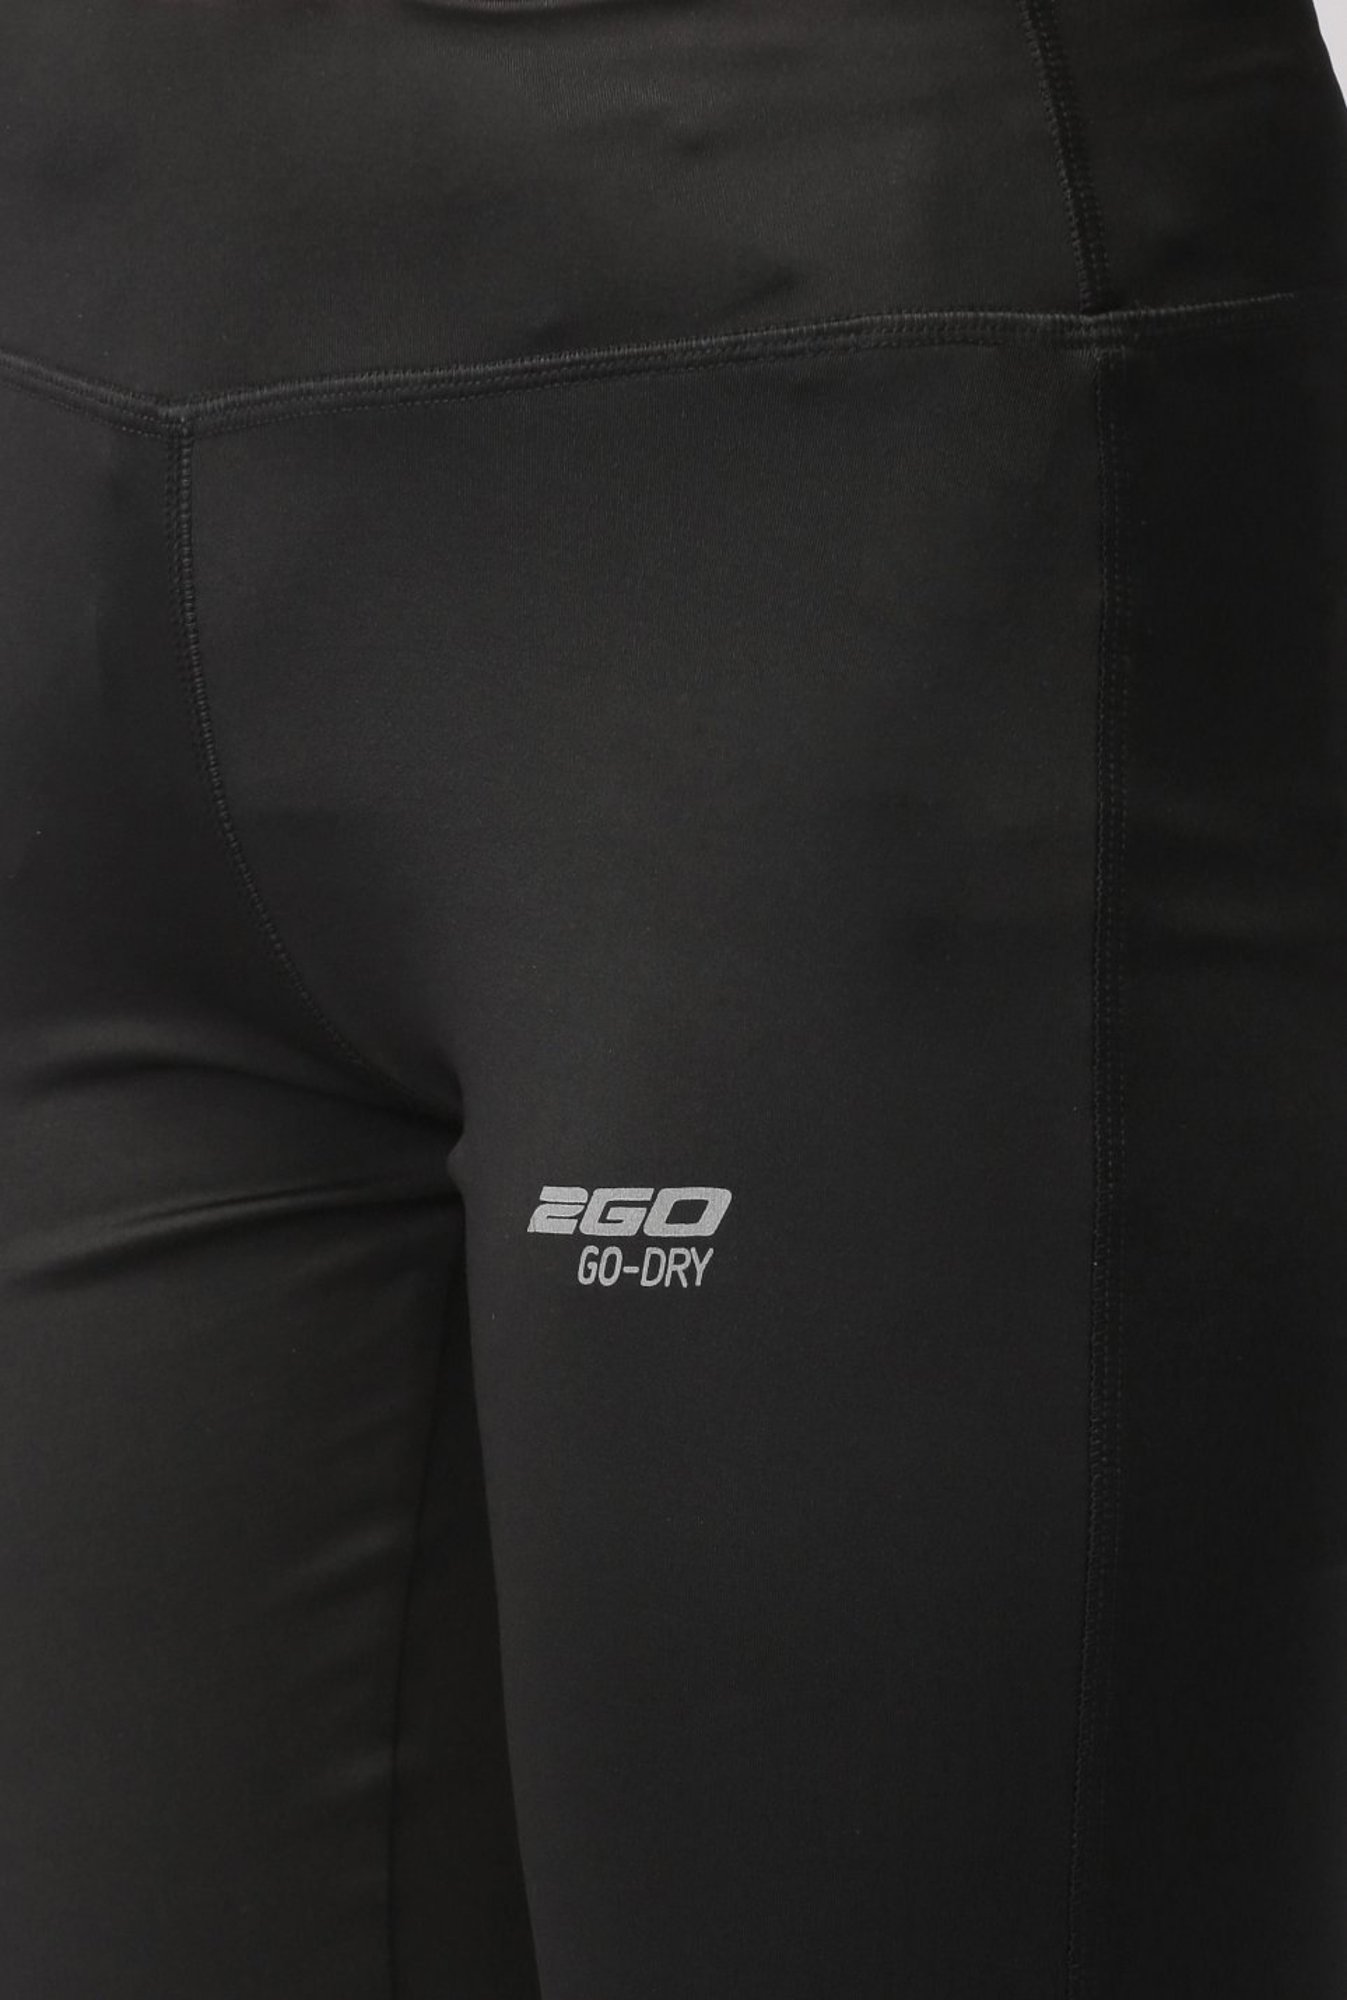 2Go Active Gear USA SteelgreyRed Track Pant  Amazonin Clothing   Accessories